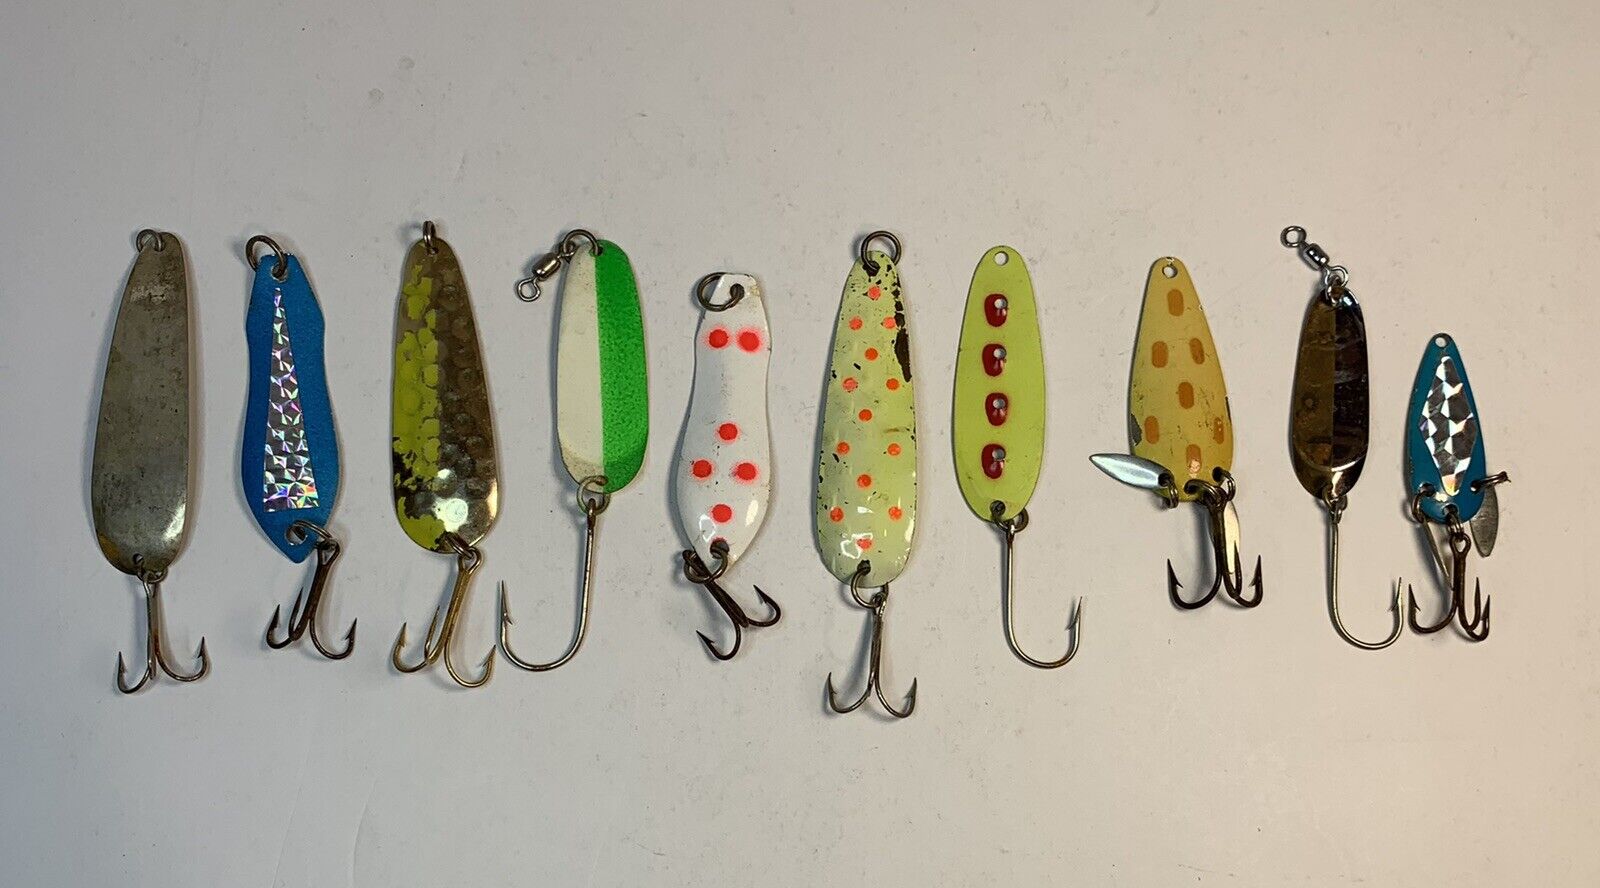 Lot of 10 Vintage Fishing Spoon Lures - Mixed Brands and Mixed Colors🔥🎣